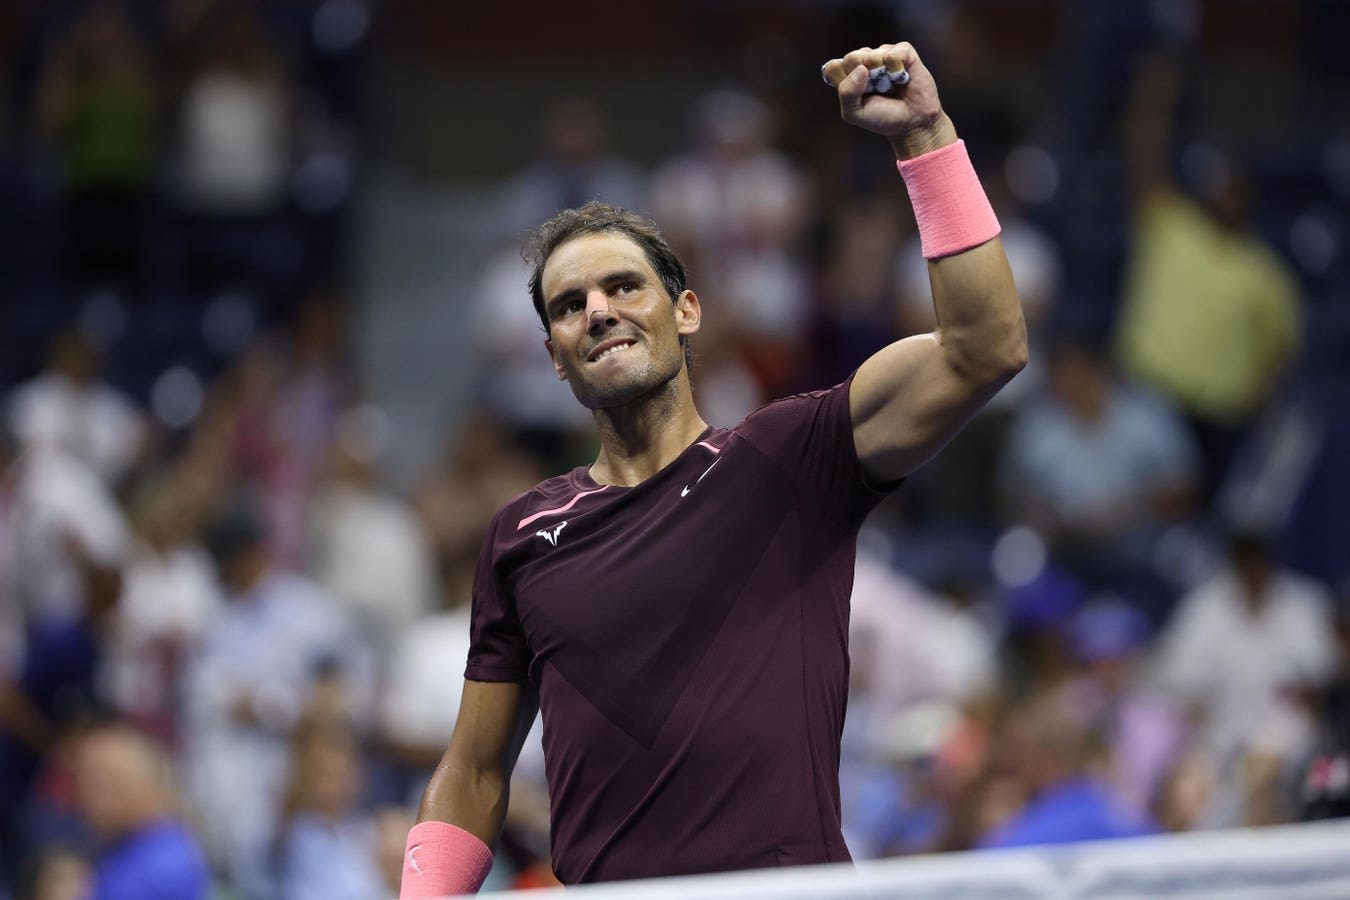 Rafael Nadal Will Play At The U.S. Open